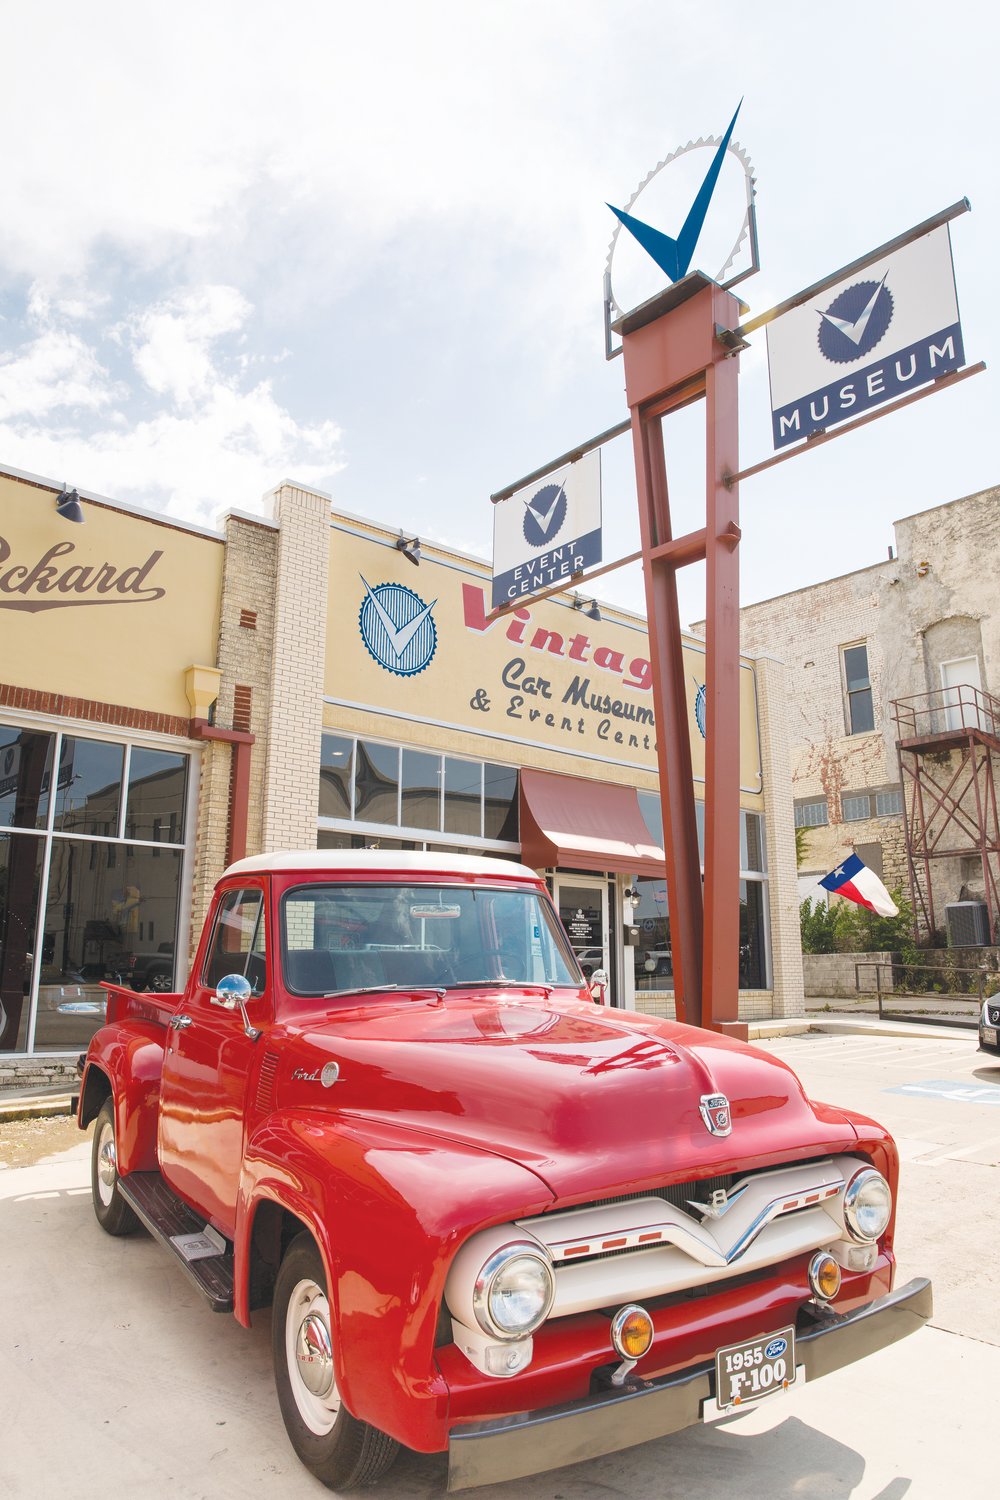 The Vintage Car Museum and Event Center is one of Weatherford's favorite attractions.